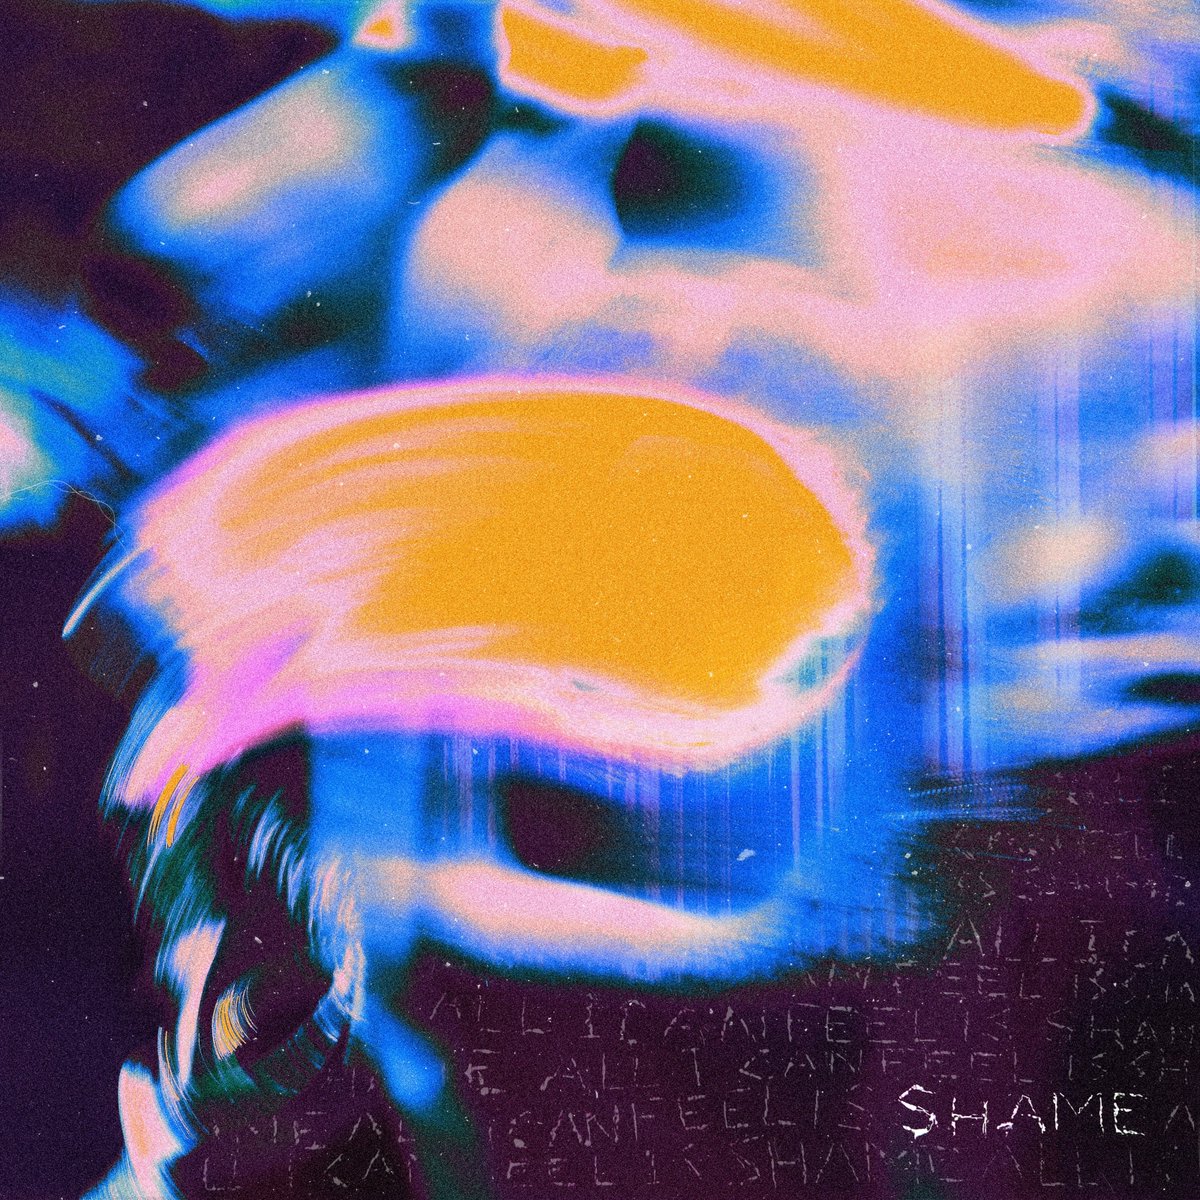 ThisCityIsOurs will be releasing their new single 'Shame' tonight @ midnight